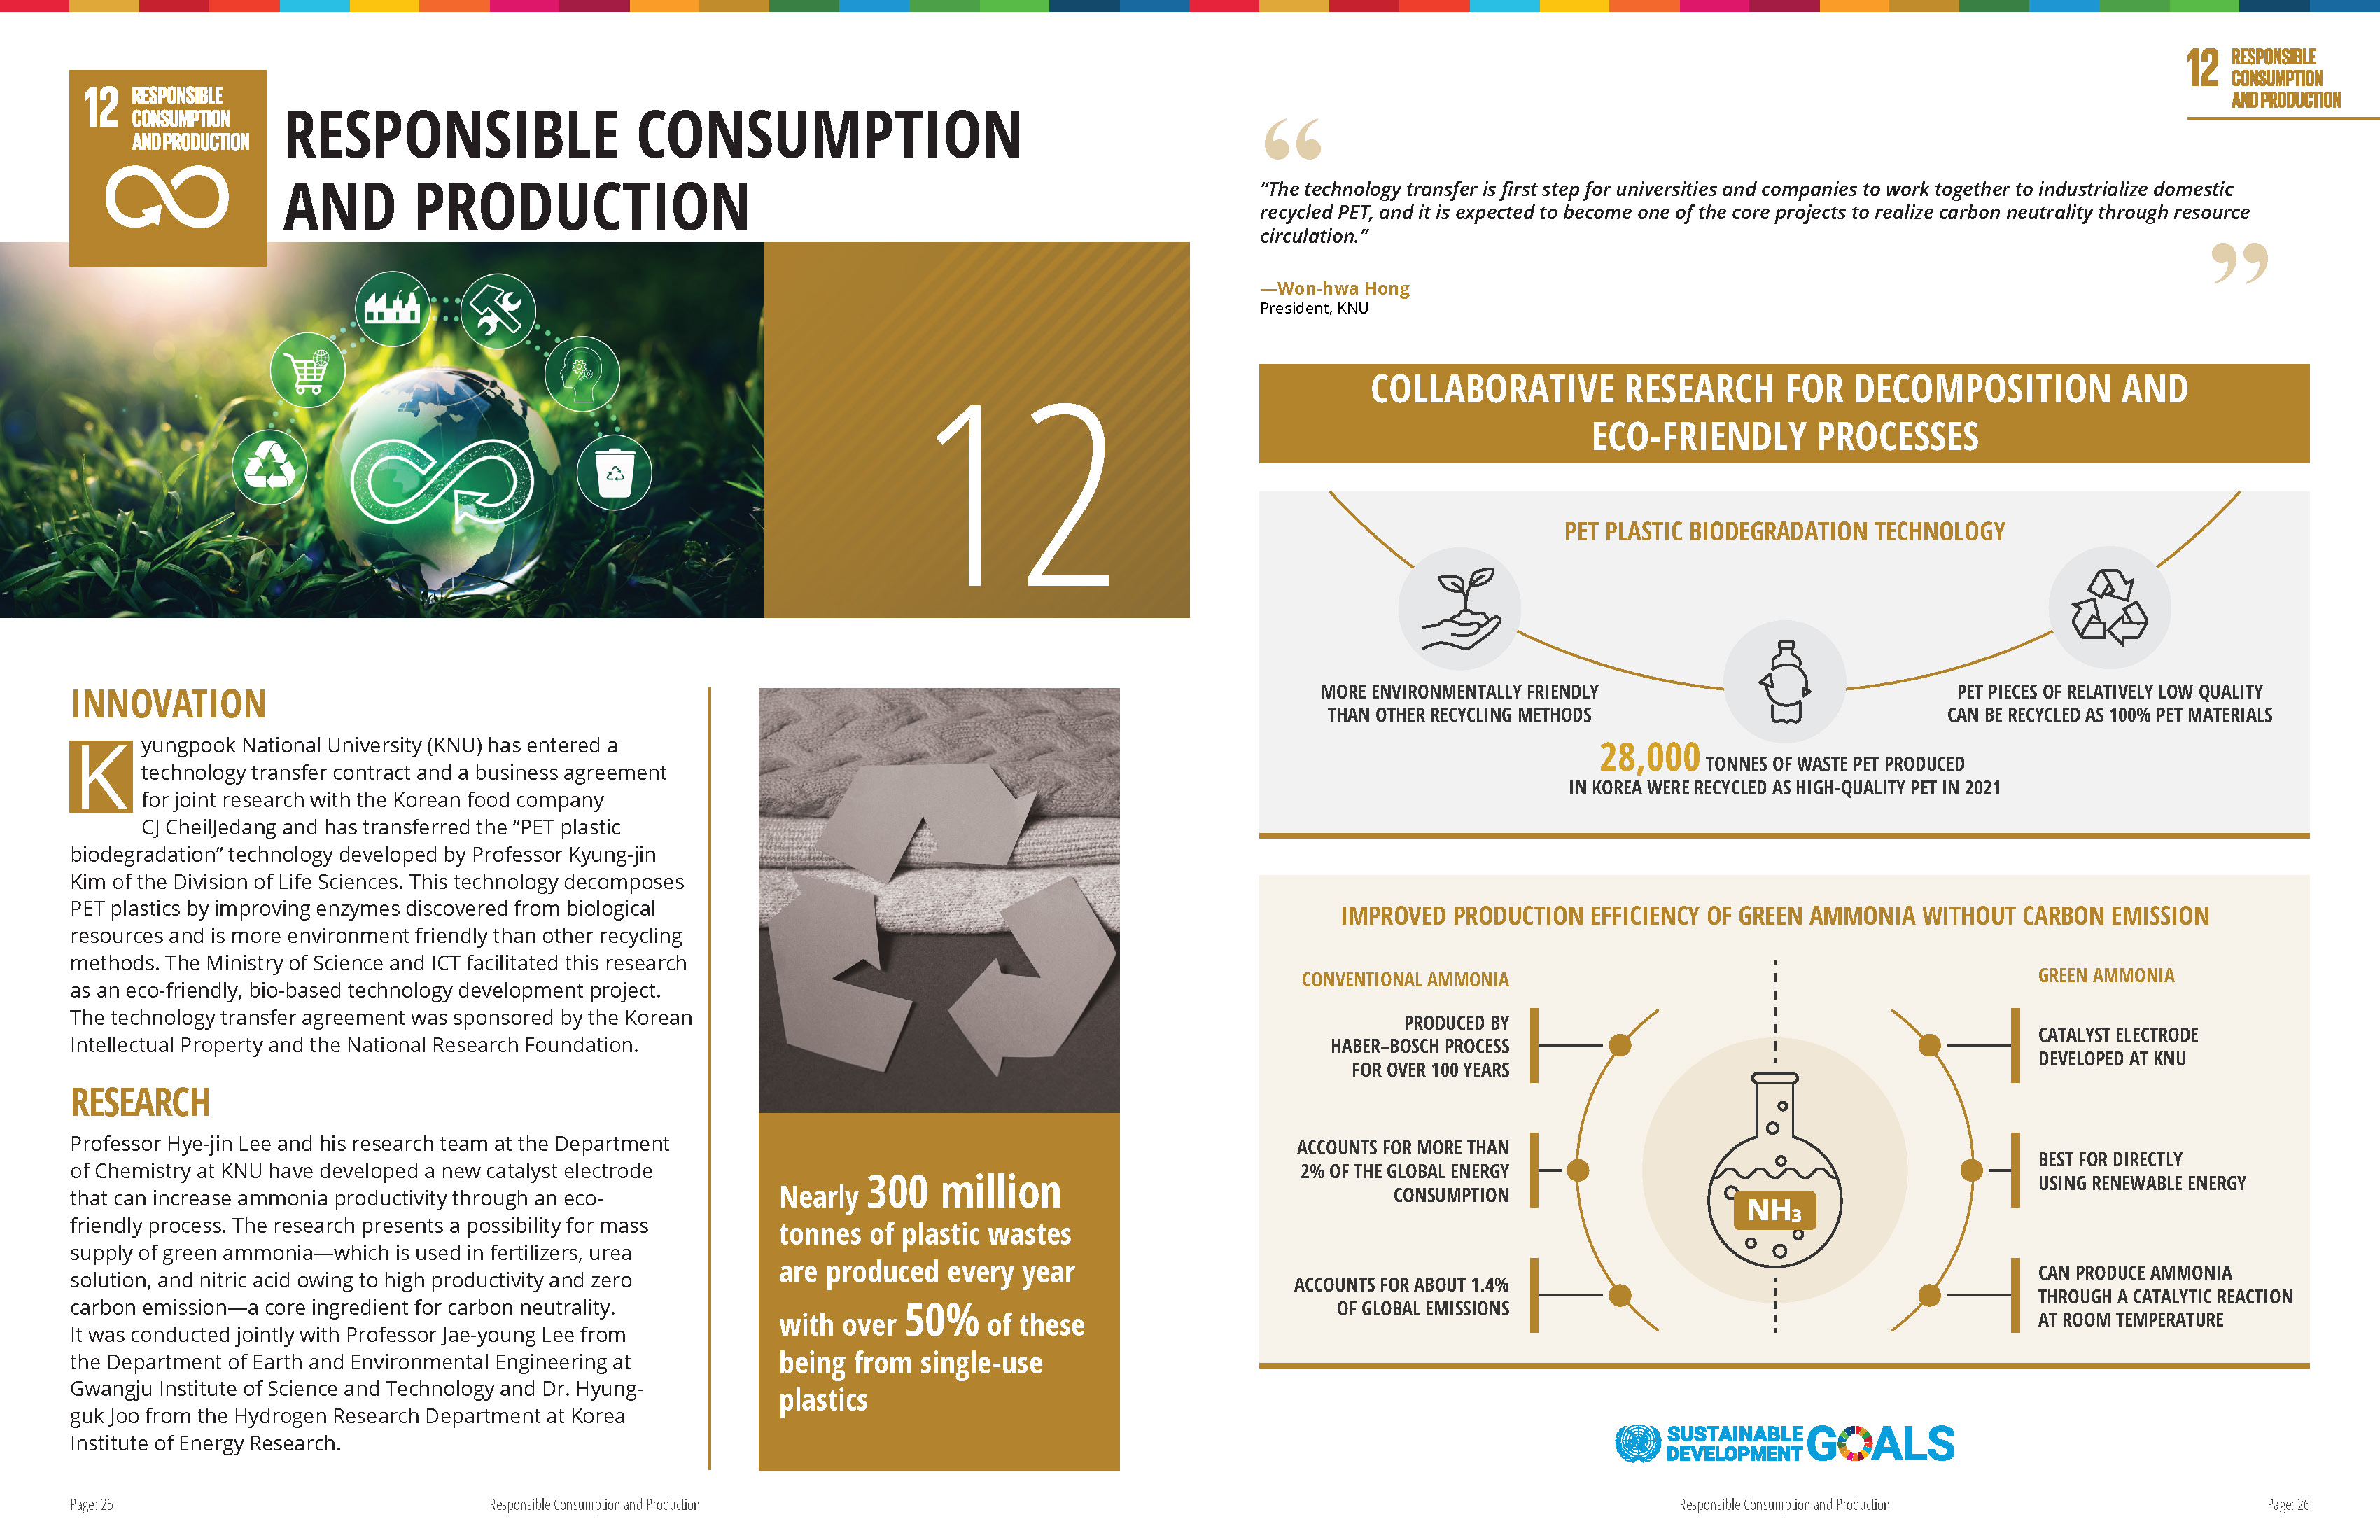 [SDG12 Responsible Consumption and Production] 2021-2022 Kyungpook National University SDG Report 관련 이미지입니다.